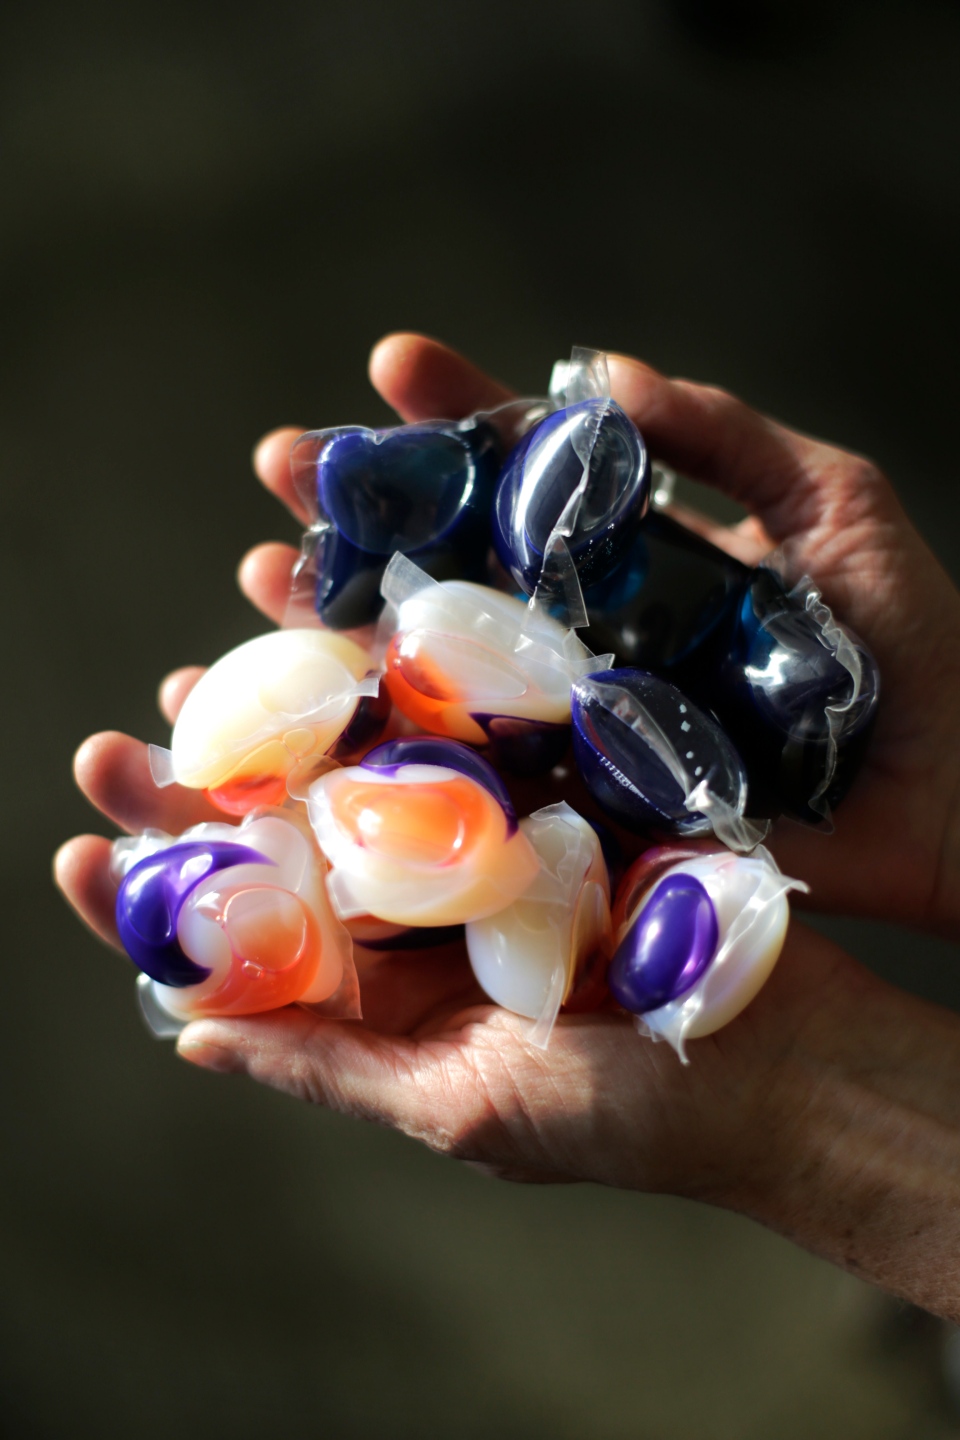 Laundry detergent packets